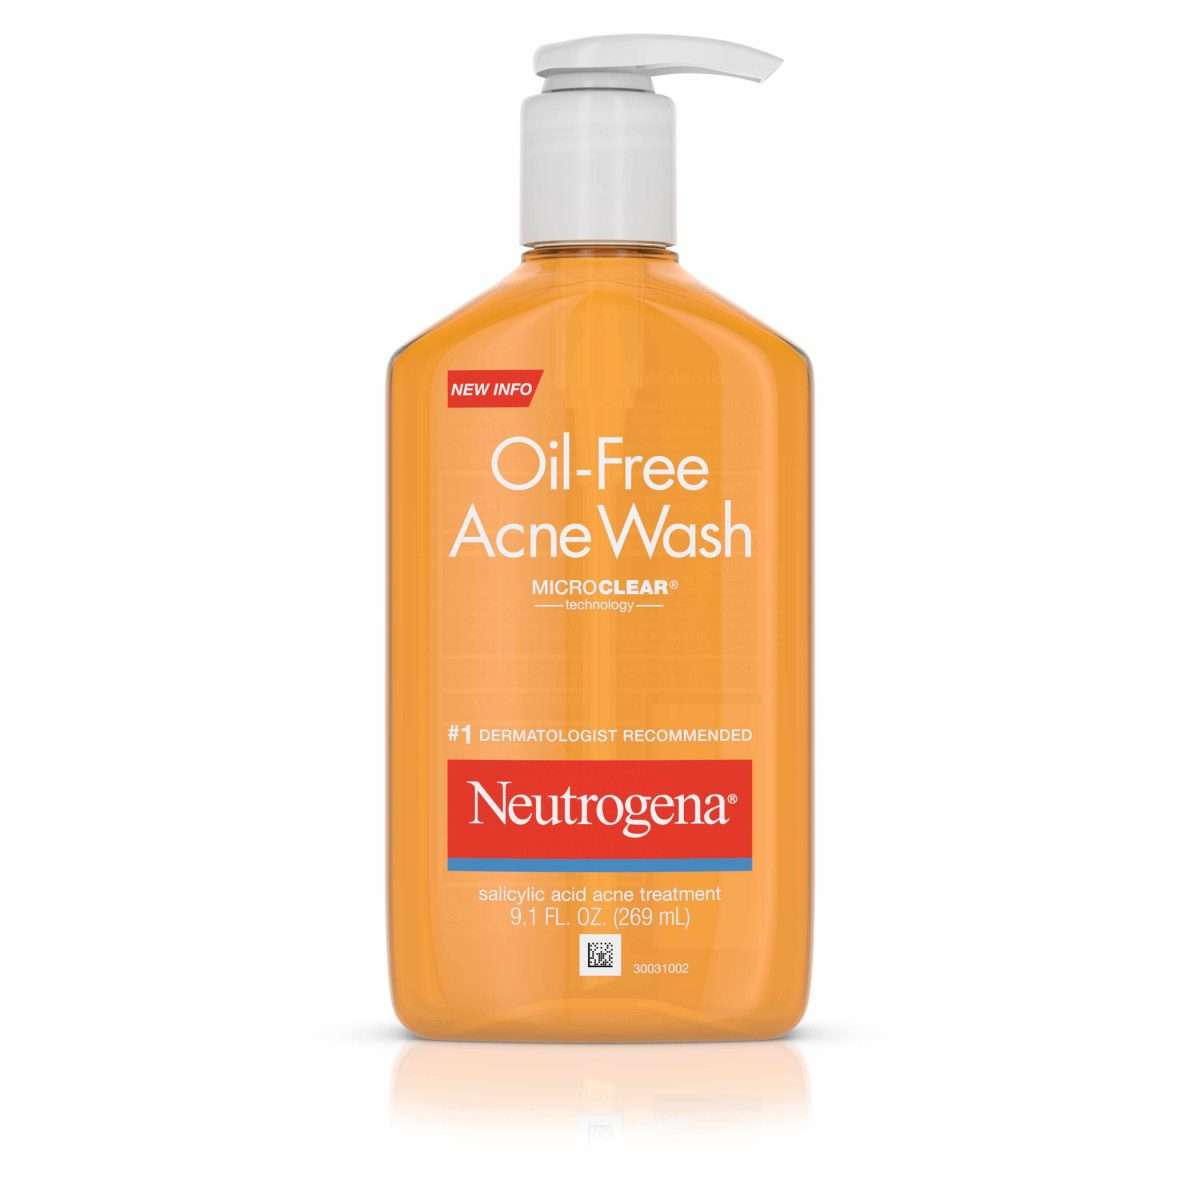 The 12 Best Acne Face Washes in 2020